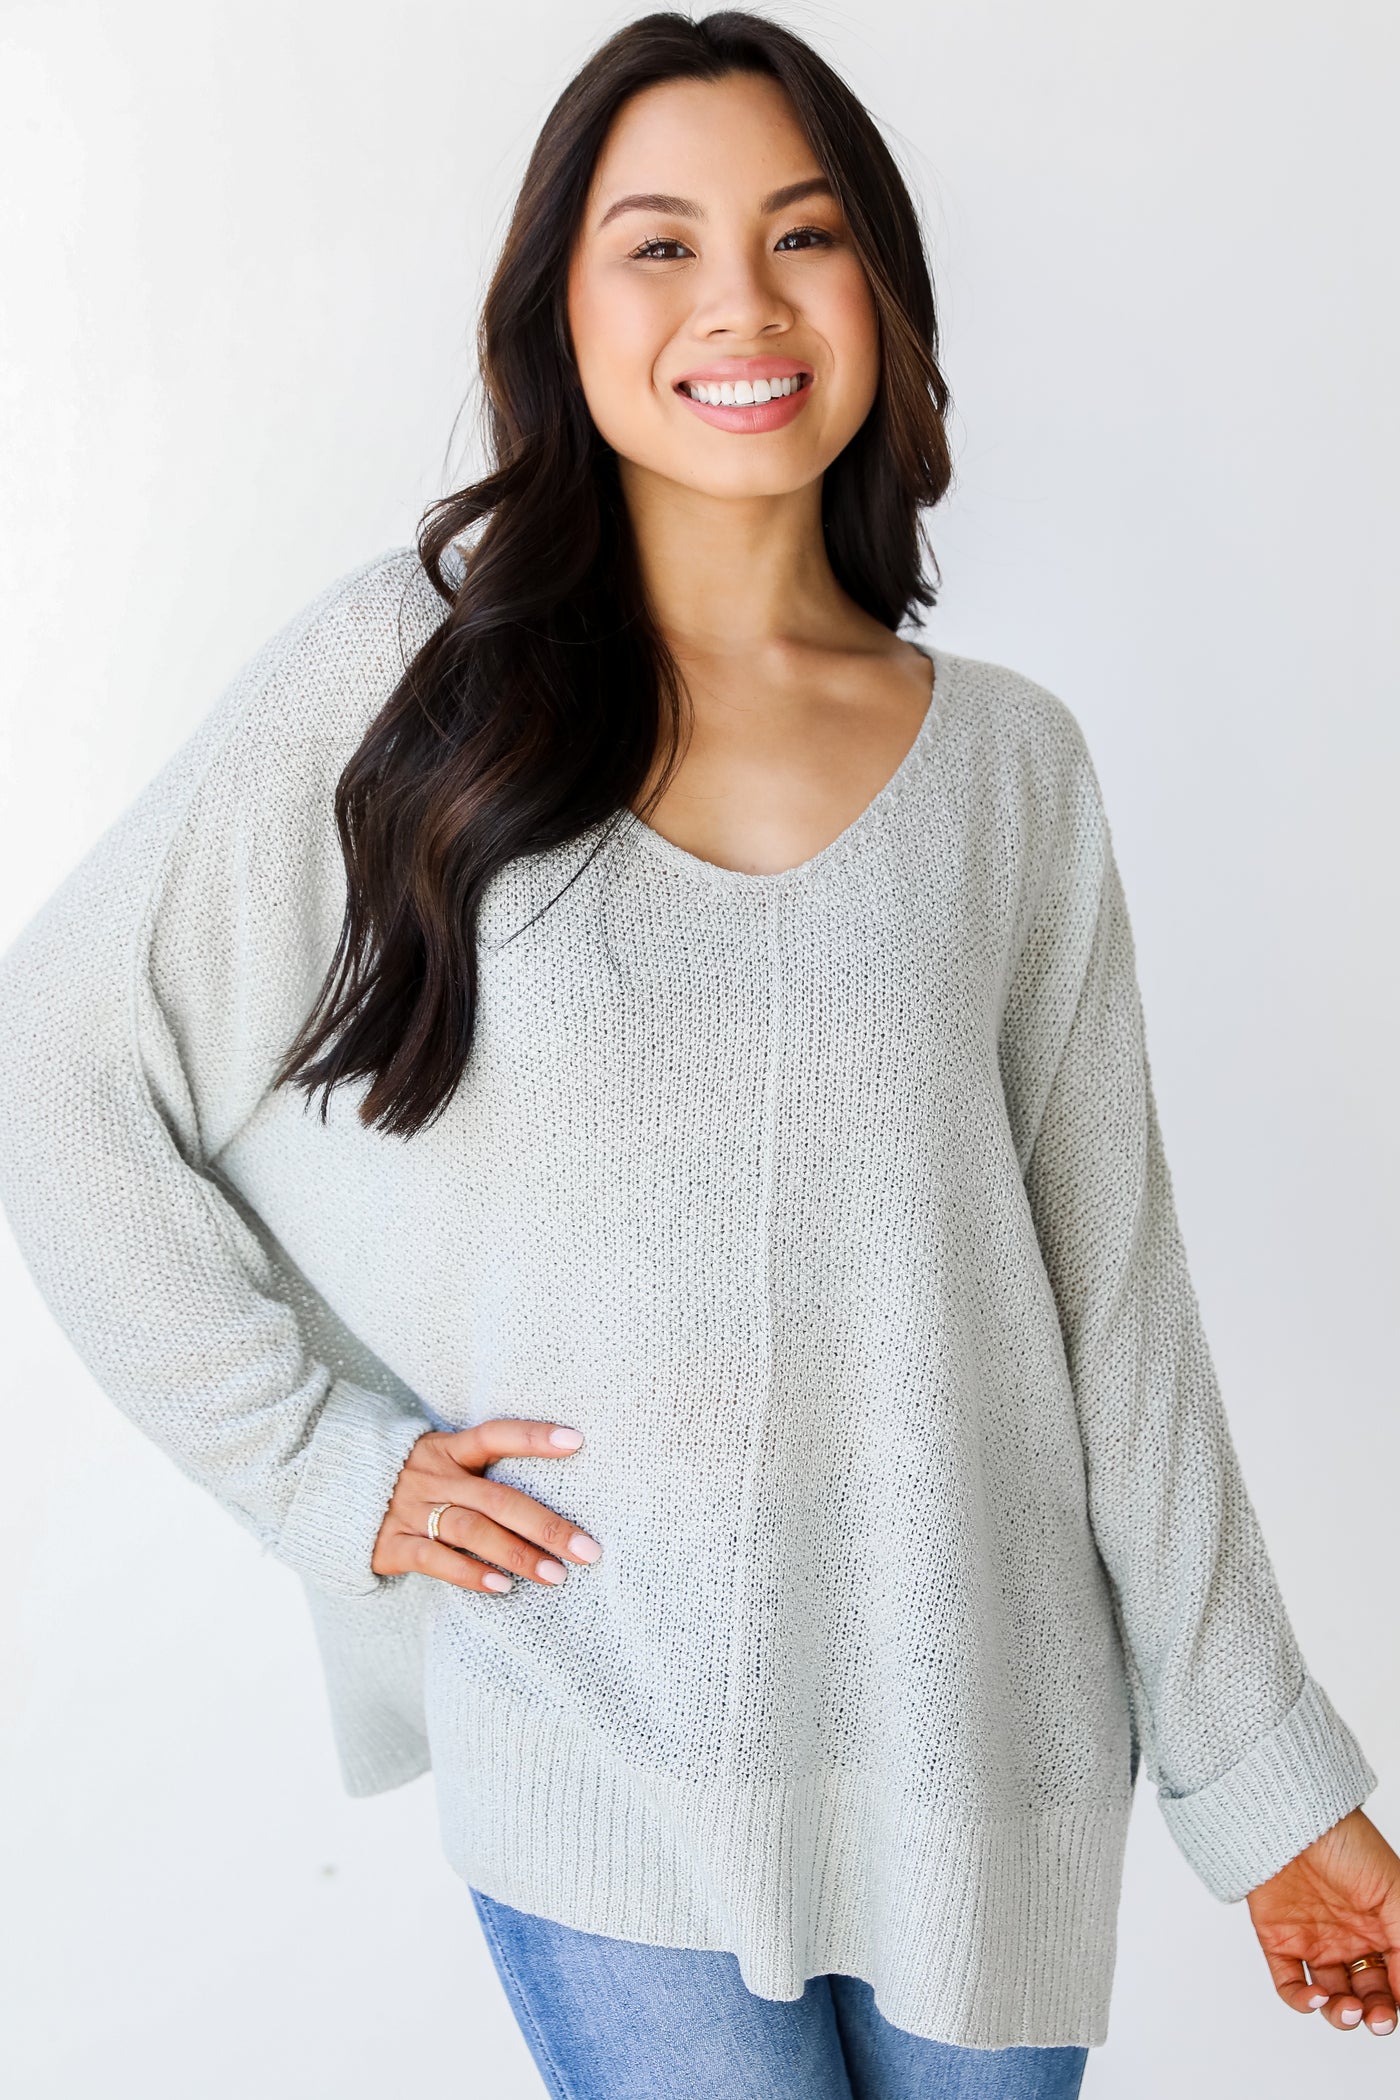 Knit Top in sage